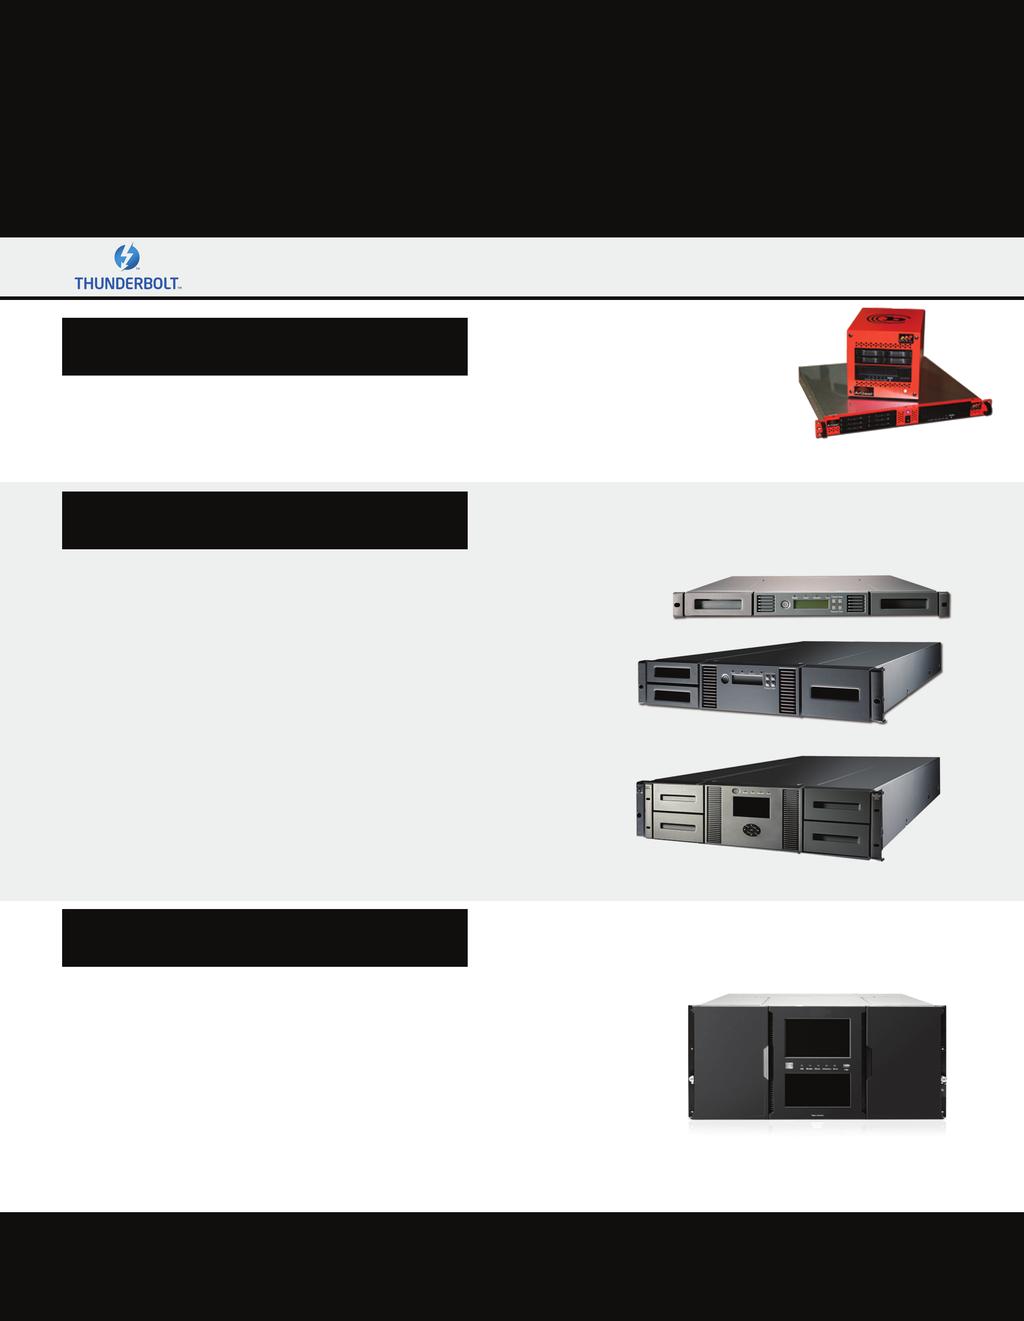 BRU Server Hardware/Software bundles with DAM/MAM Bundles include LTO hardware, BRU Server software, CatDV software and DAX Broadcast Archive software for maximum DAM/MAM flexibility and workflow.